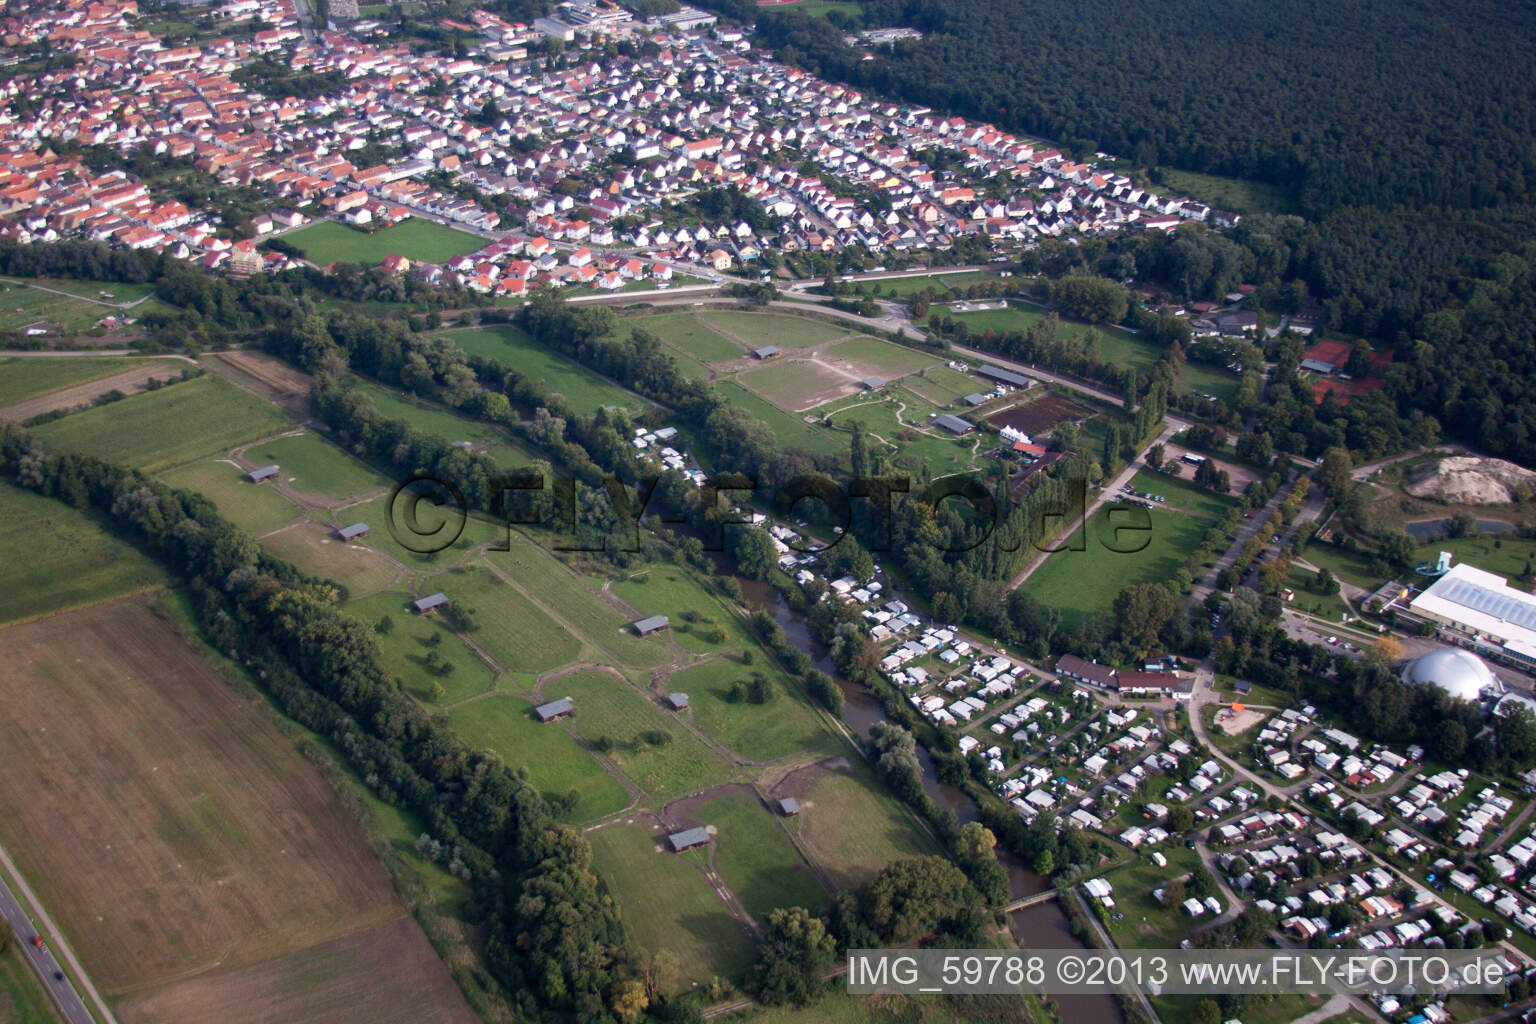 Aerial photograpy of Mhou ostrich farm at the Moby Dick leisure center in Rülzheim in the state Rhineland-Palatinate, Germany